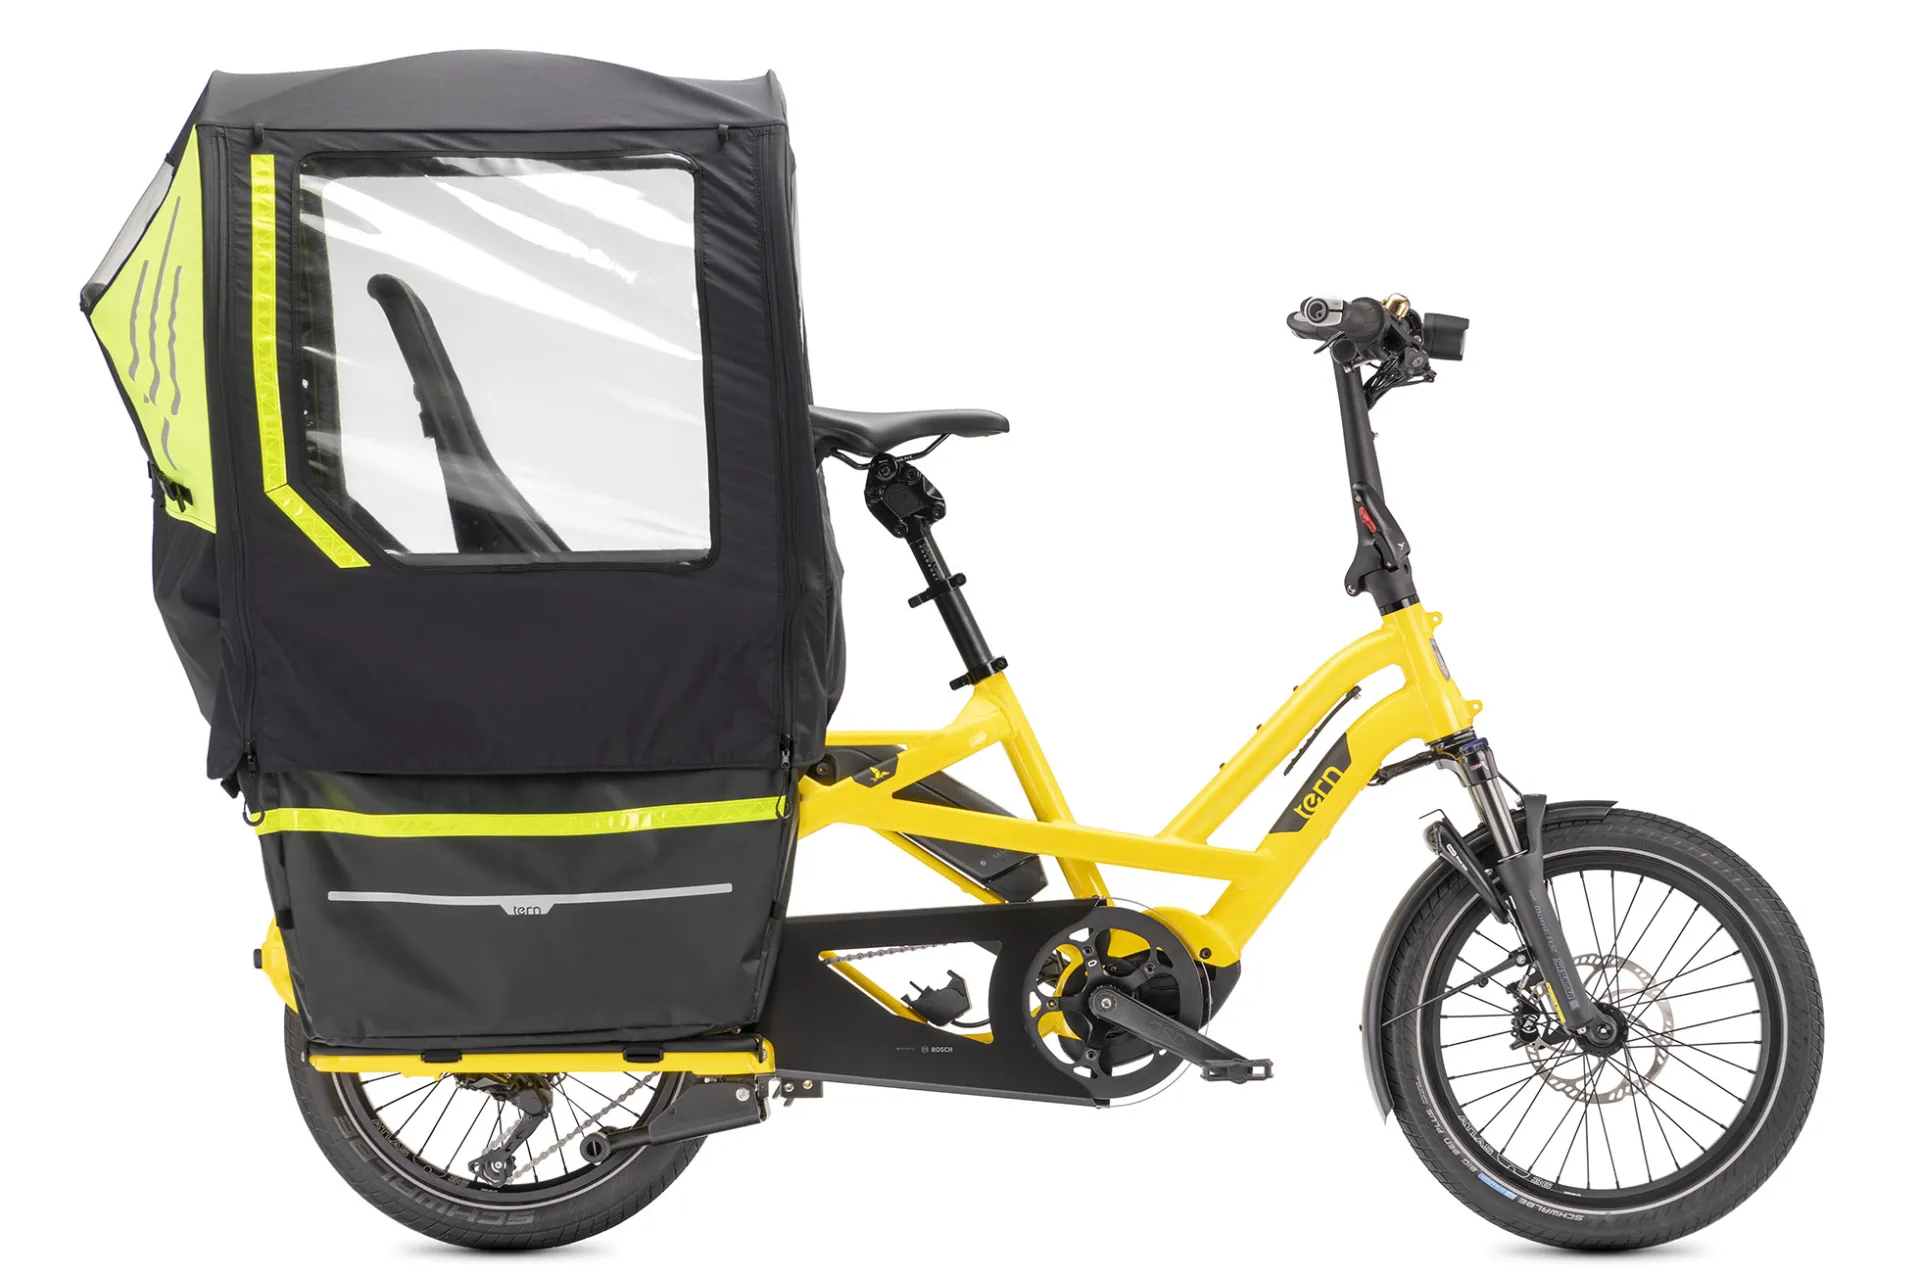 Storm Shield: Rain Canopy for Kids on the GSD